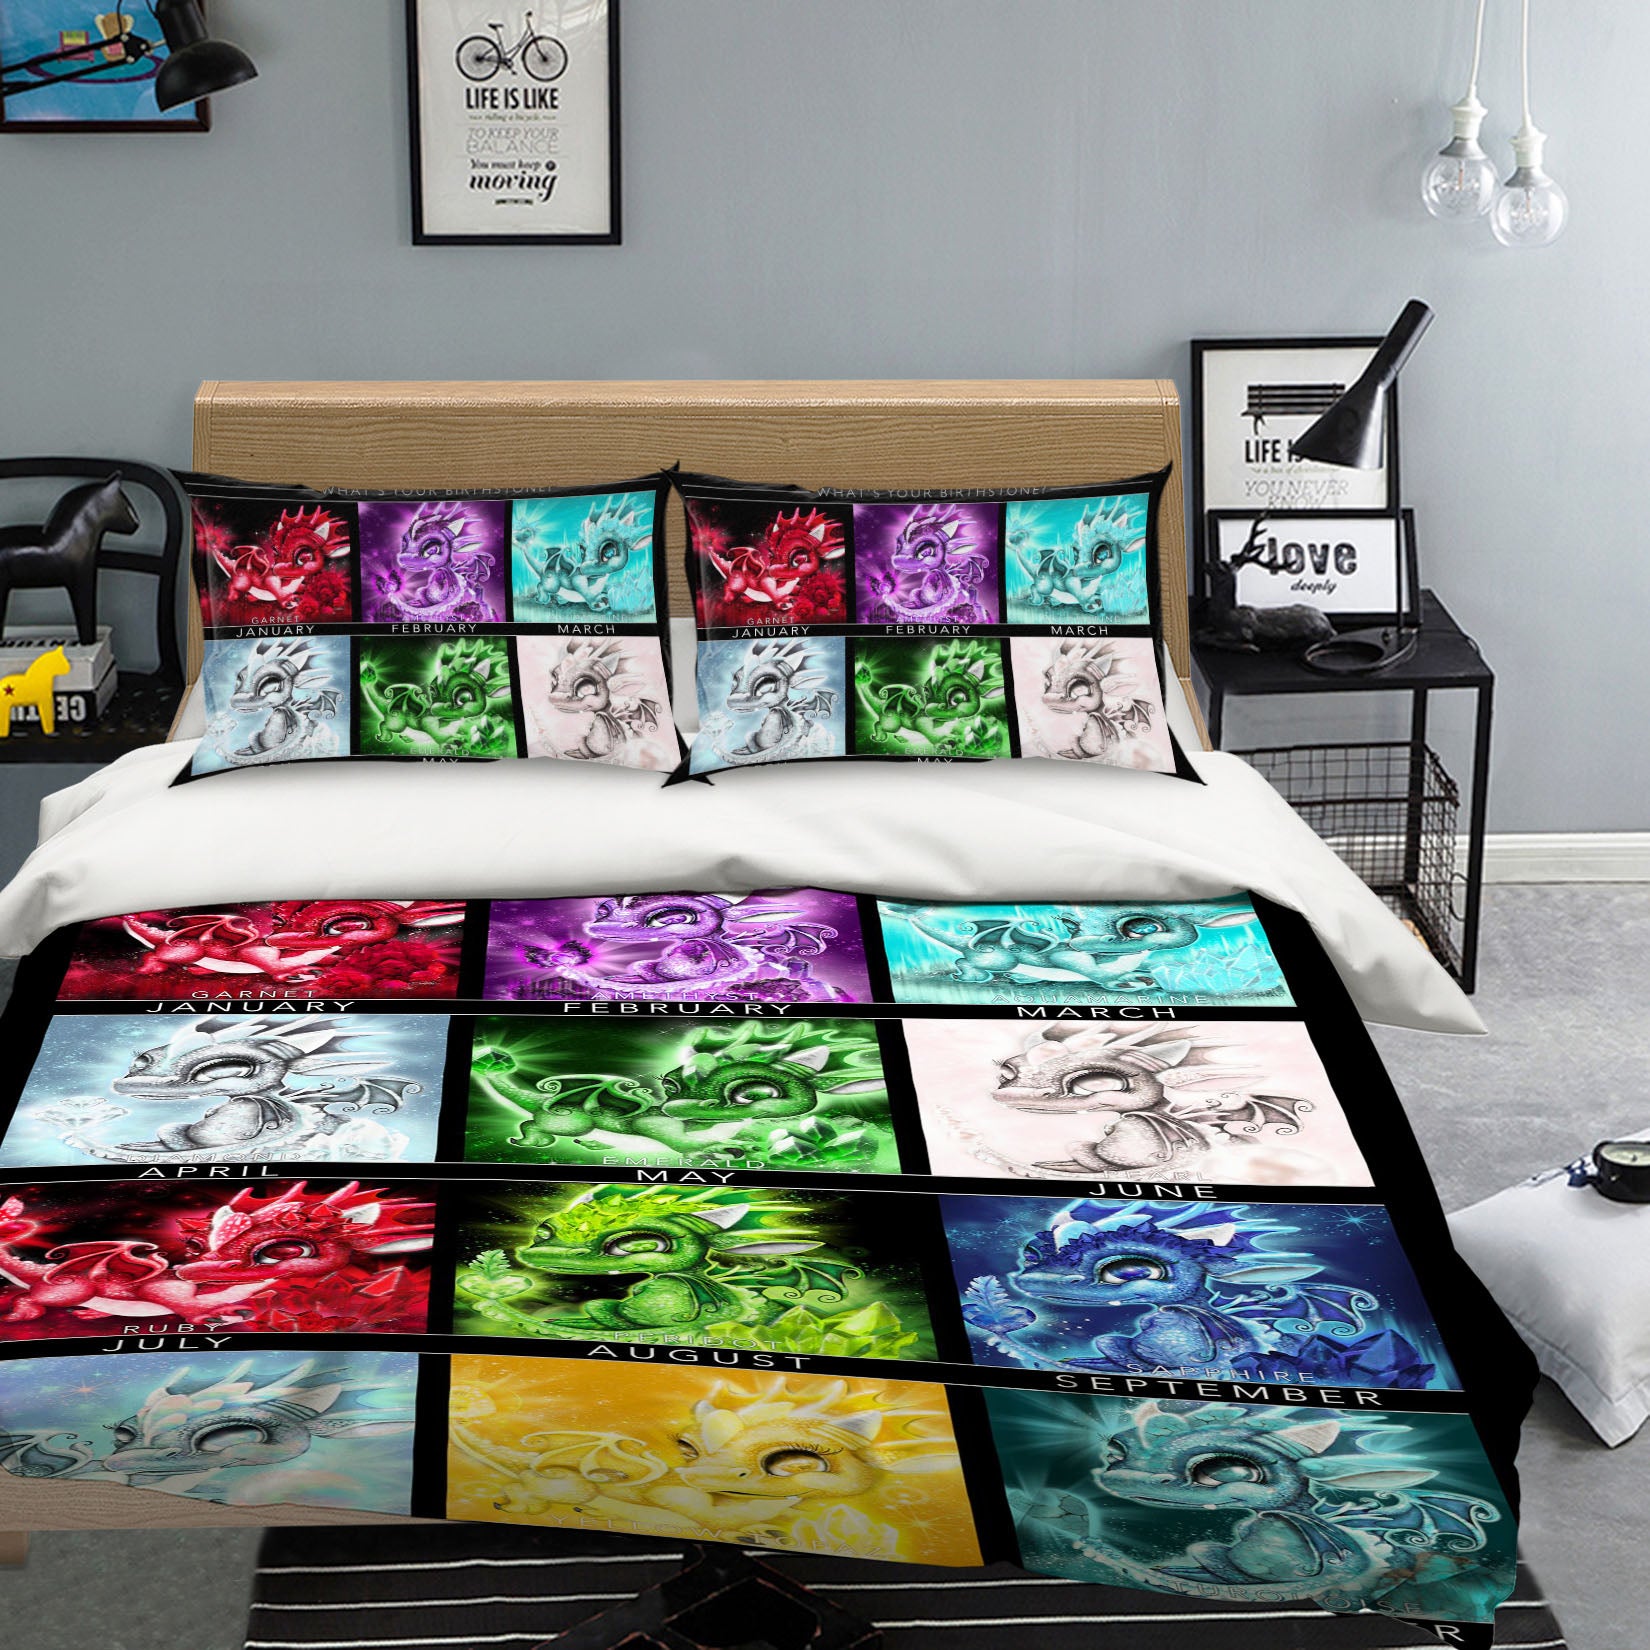 3D Month Dragon 8618 Sheena Pike Bedding Bed Pillowcases Quilt Cover Duvet Cover